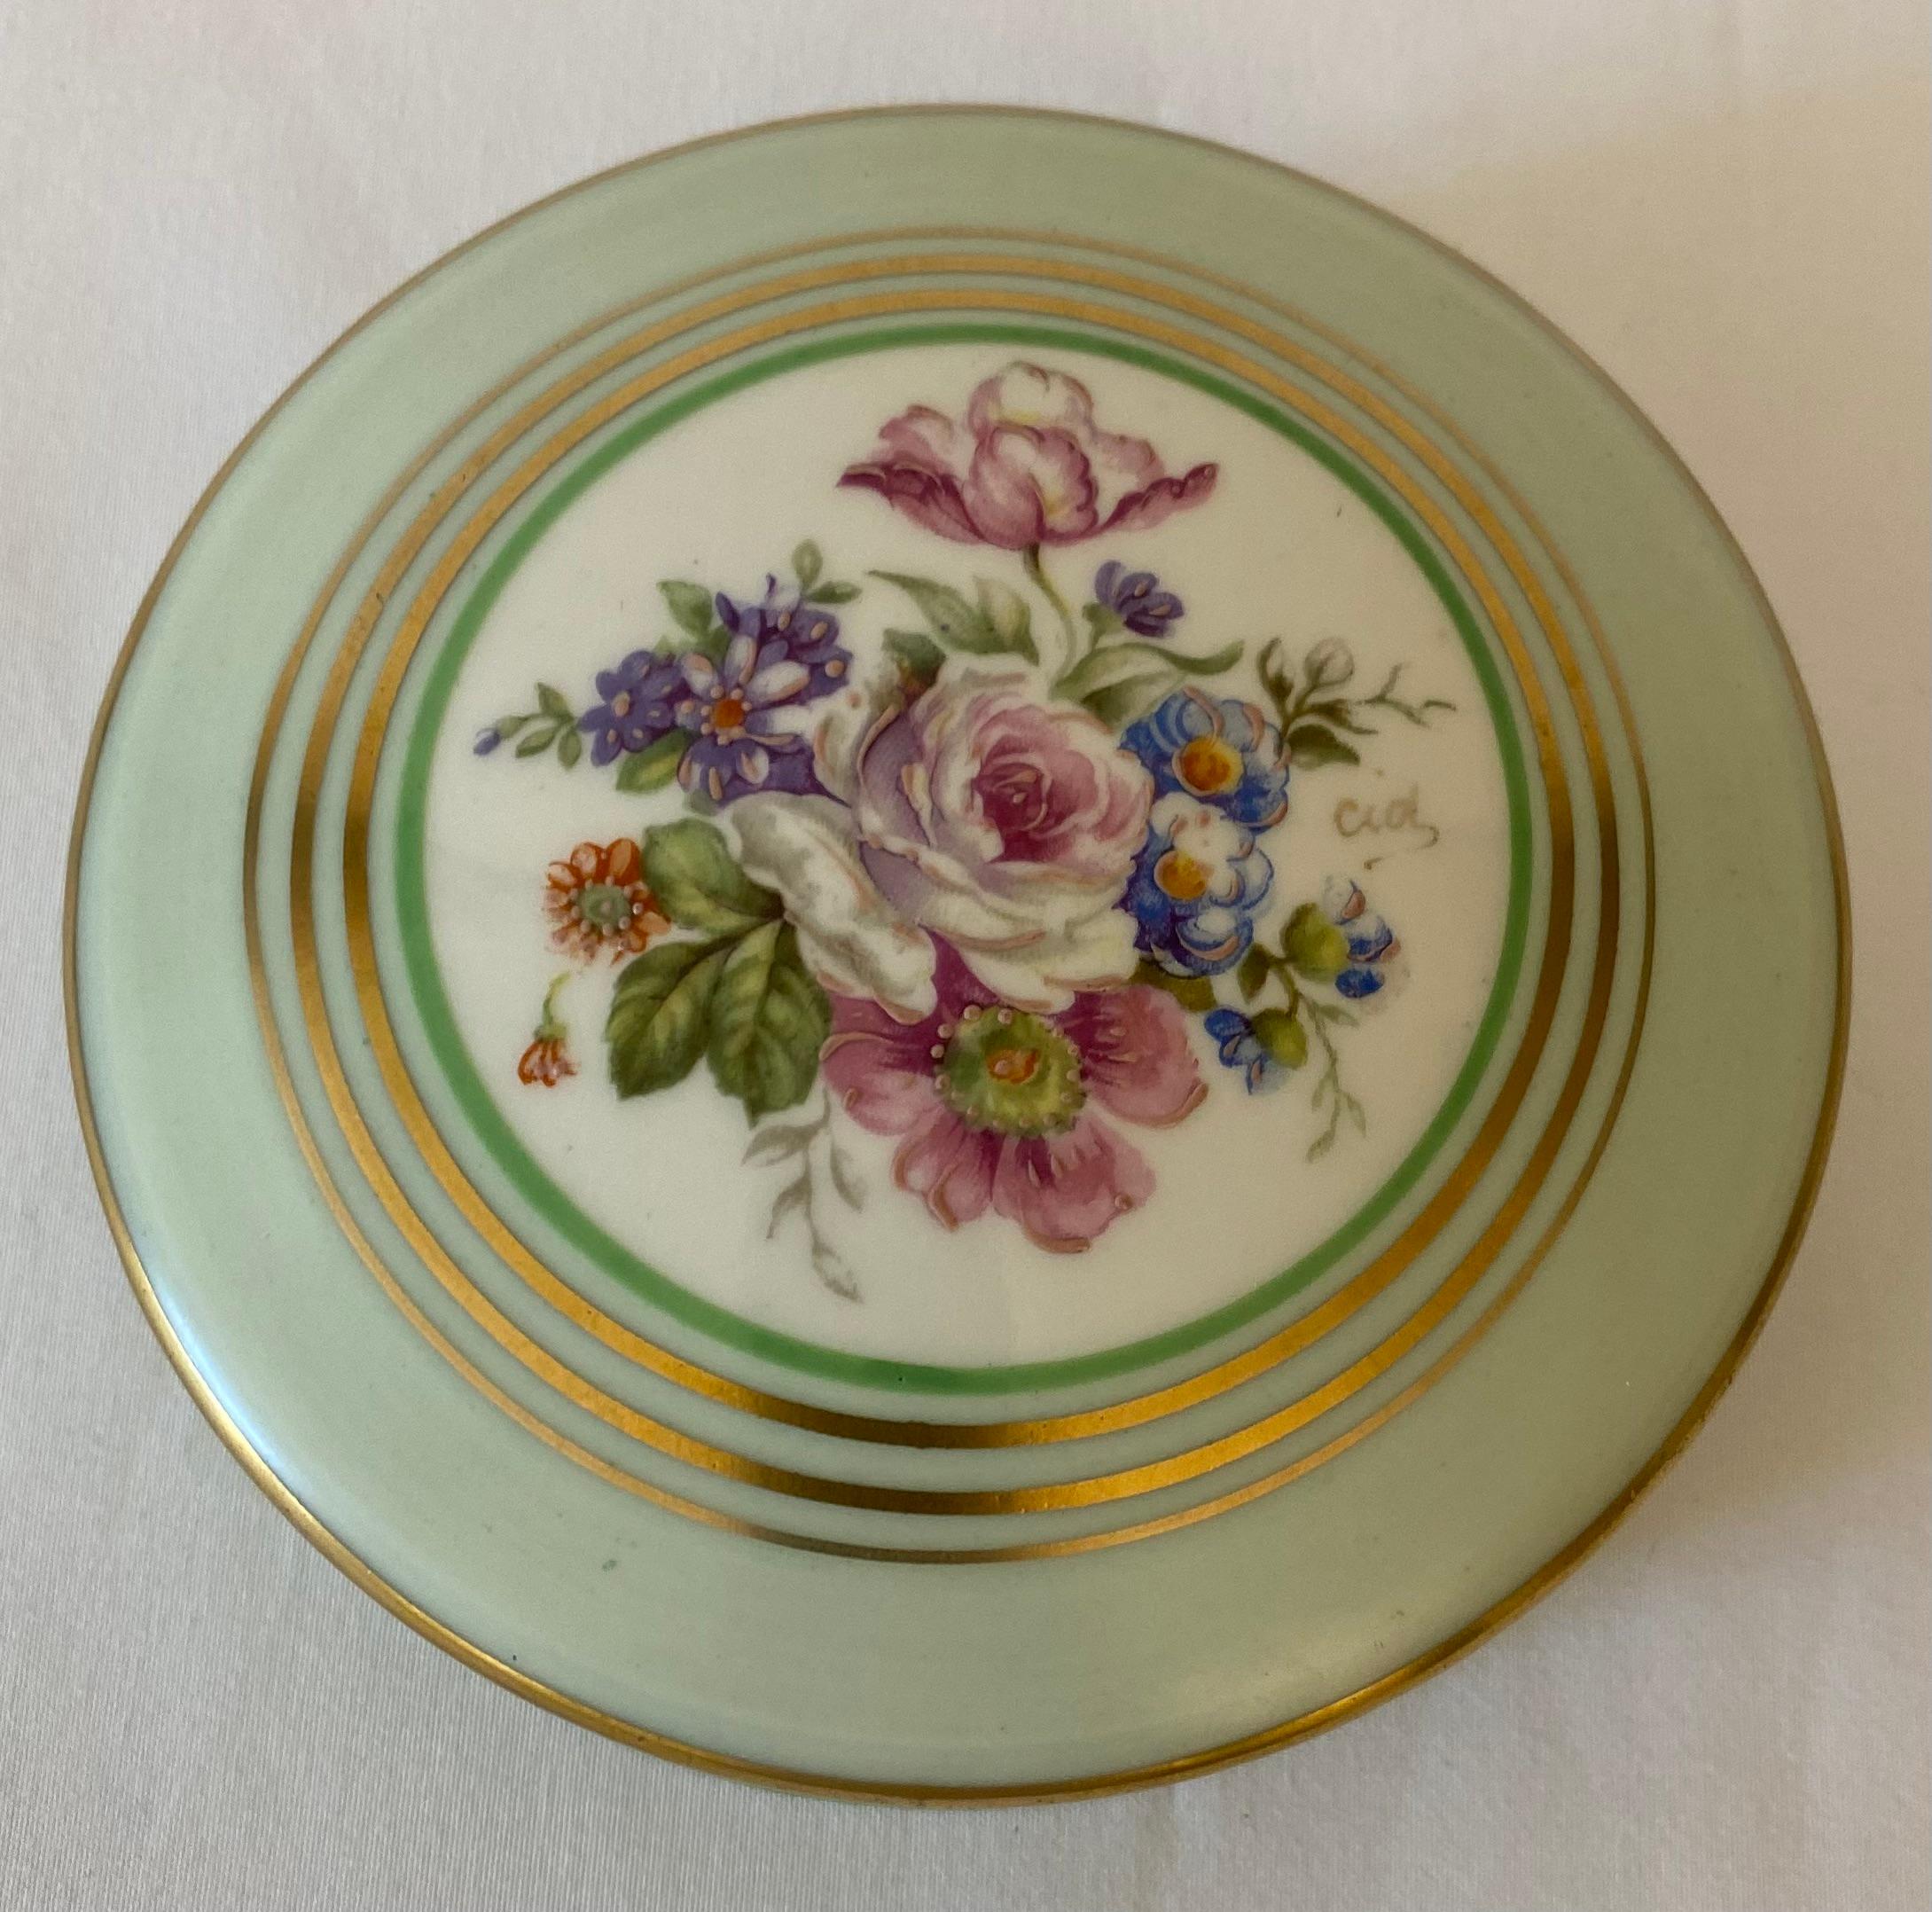 Beautiful Limoges porcelain hand crafted and hand painted gold trimmed trinket, jewelry box or lidded candy dish, circa 1930. 
Marked, see photos.

Very good antique condition, no cracks or chips.
Measures: 4 1/2